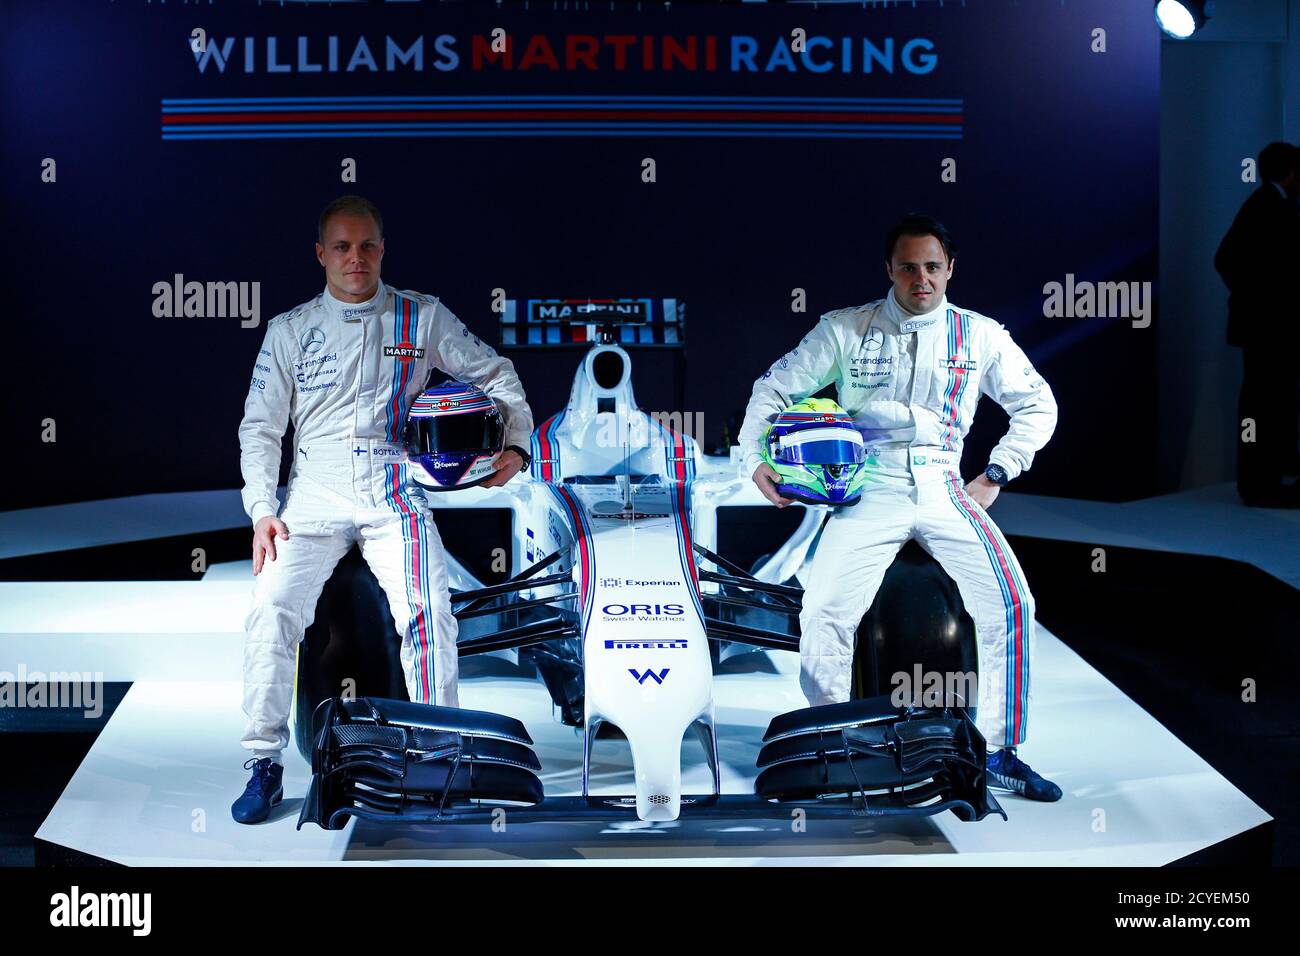 Drivers Felipe Massa (R) of Brazil and Valtteri Bottas of Finland pose for photographers at the launch of the new livery for the Williams-Martini Formula One motor racing car in London, England March 6, 2014. Italian spirits brand Martini will become the main sponsor of the Williams Formula One motor racing team this season, with the company logo featuring on a new predominantly white car.  REUTERS/Eddie Keogh (BRITAIN - Tags: SPORT MOTORSPORT F1) Stock Photo